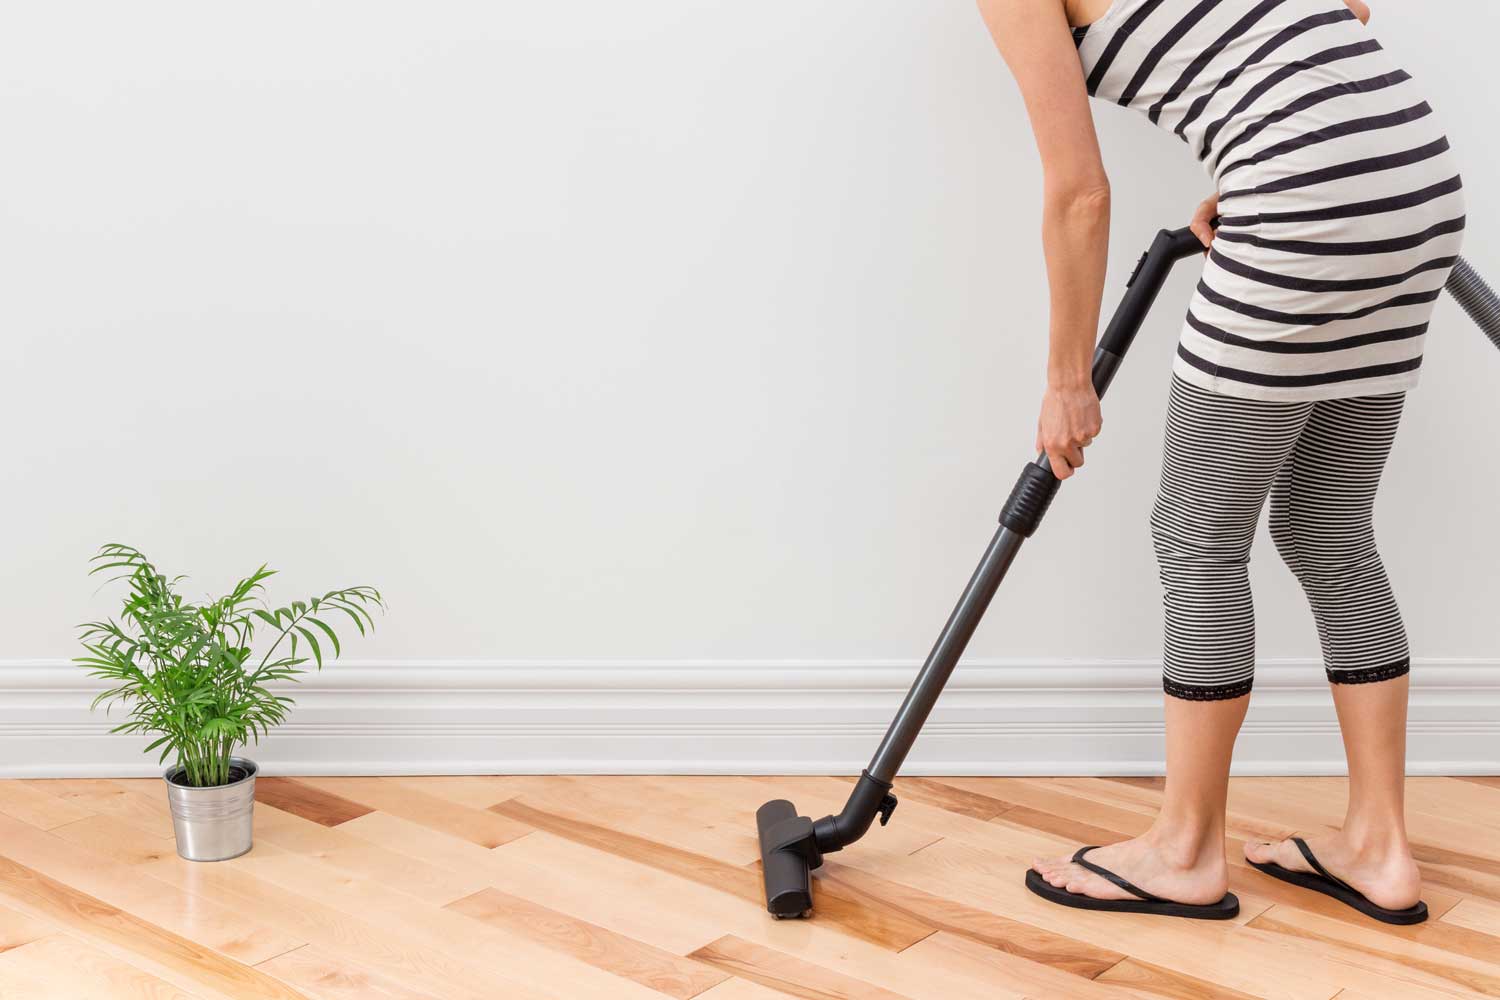 Regulary vacuum or sweep floors to remove dirt and keep your home floors looking amazing - tips from Footprints Floors in St. Paul / Woodbury.